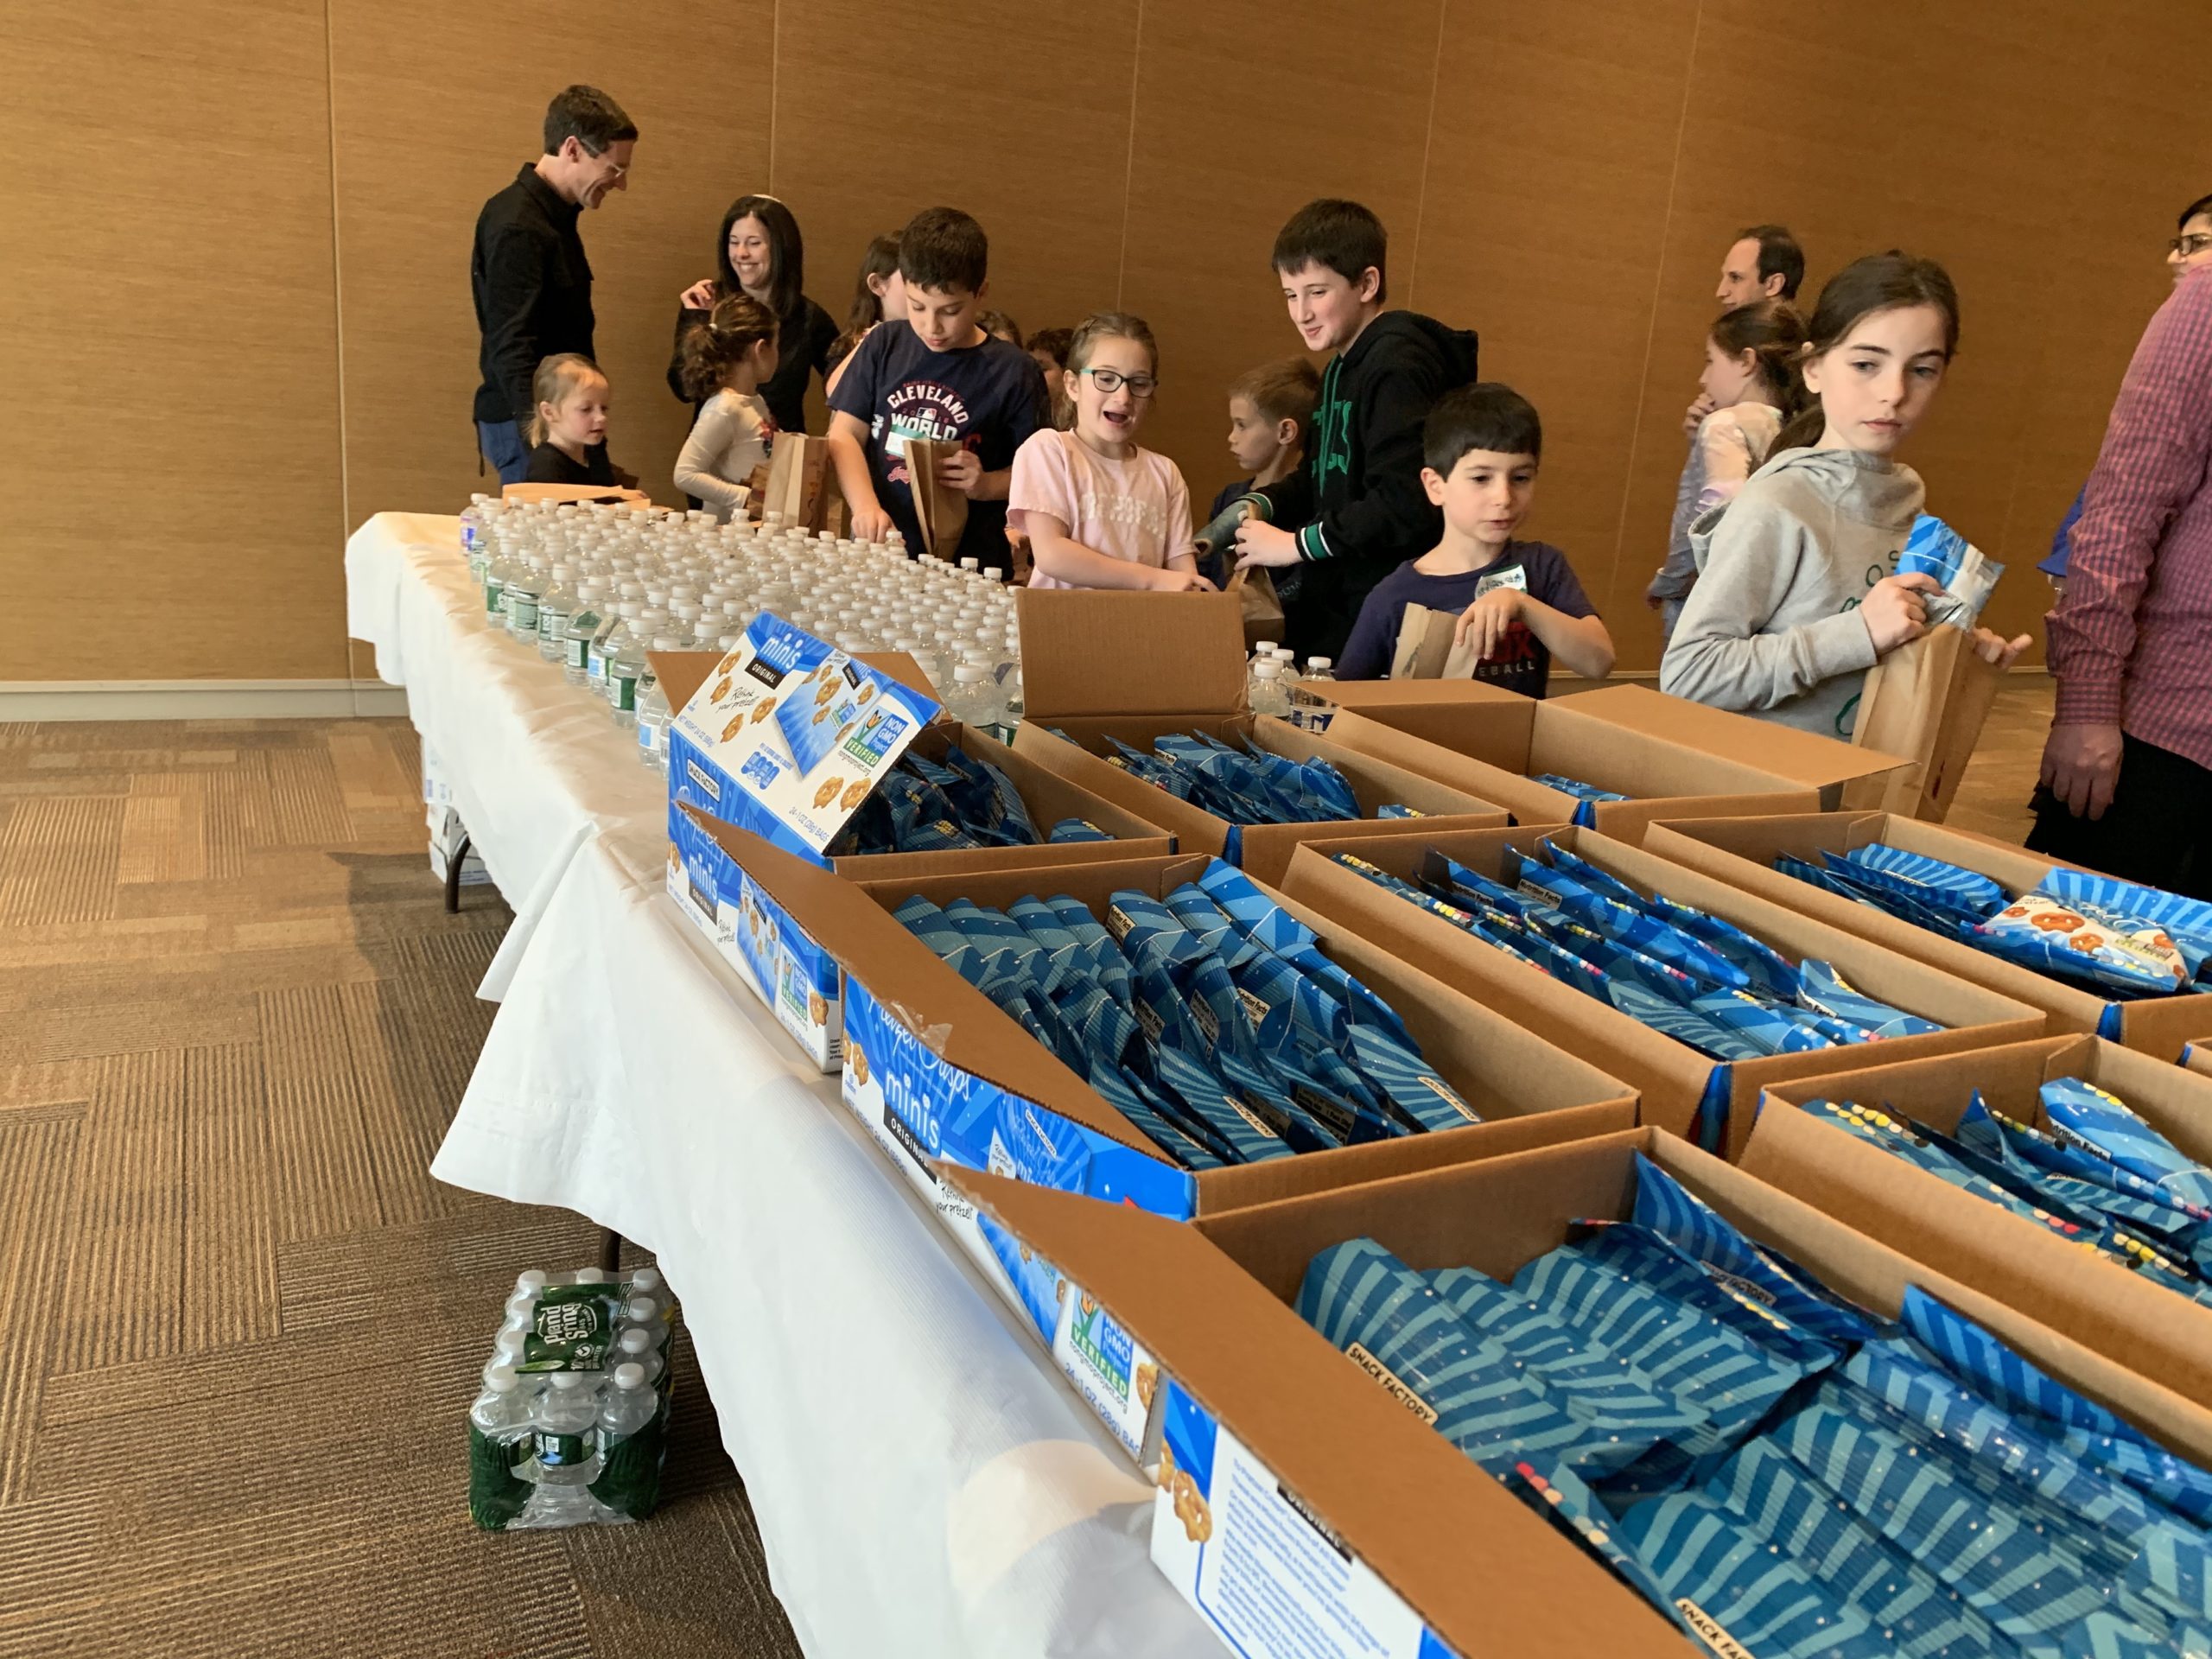 FSAG assembles snack bags for A Place to Turn, a Natick food pantry